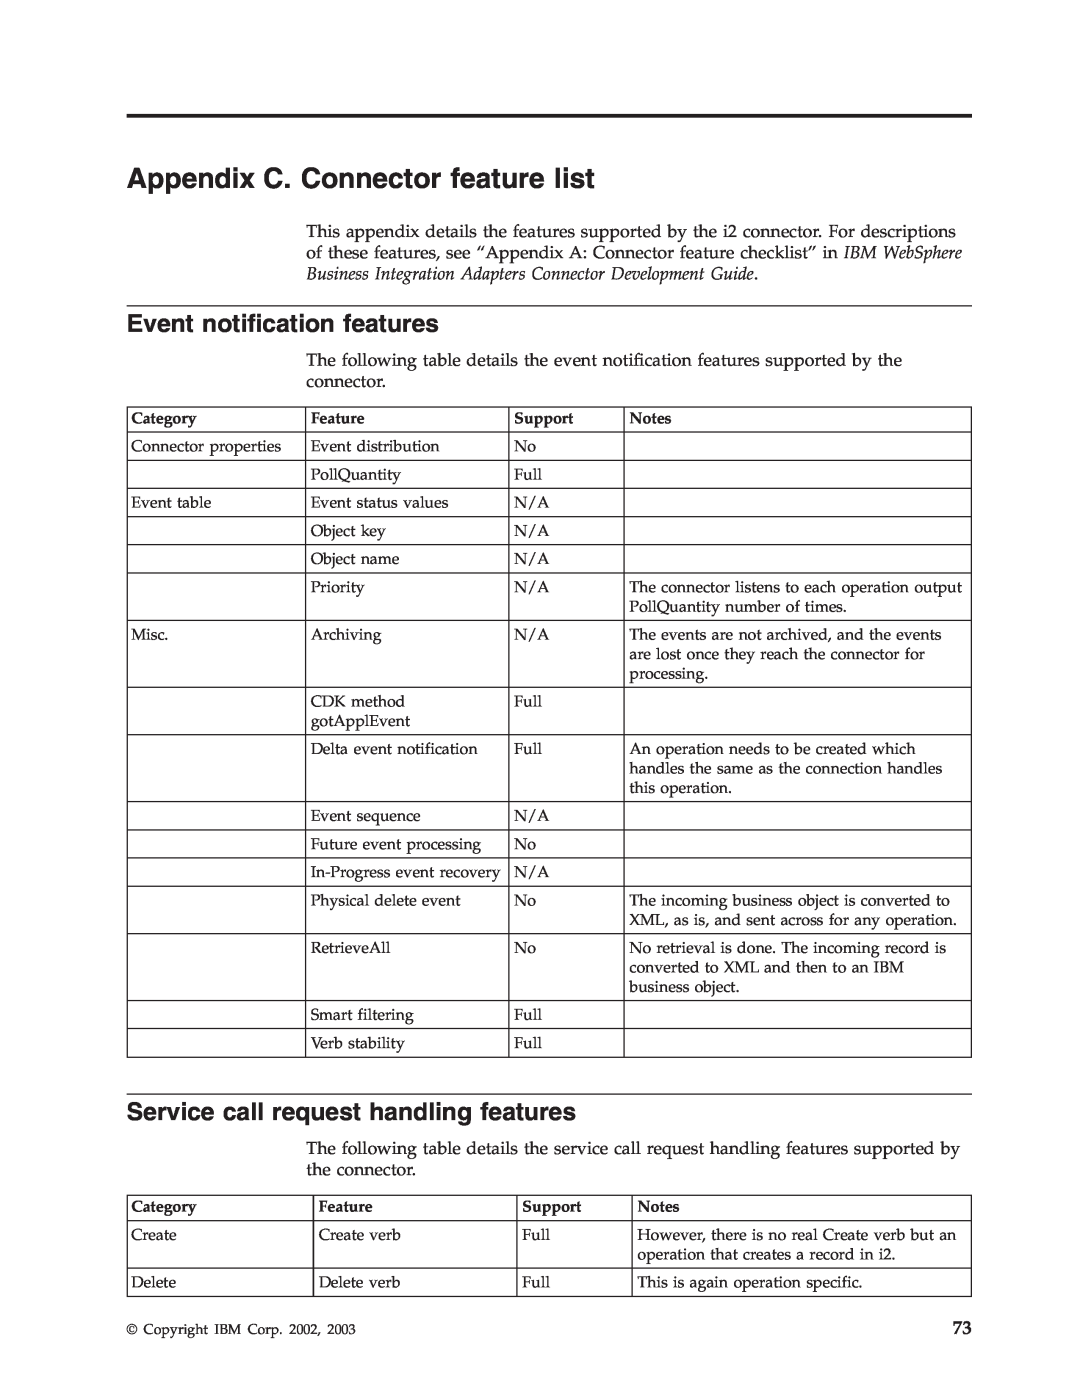 IBM WebSphere Business Integration Adapter manual Appendix C. Connector feature list, Event notification features 